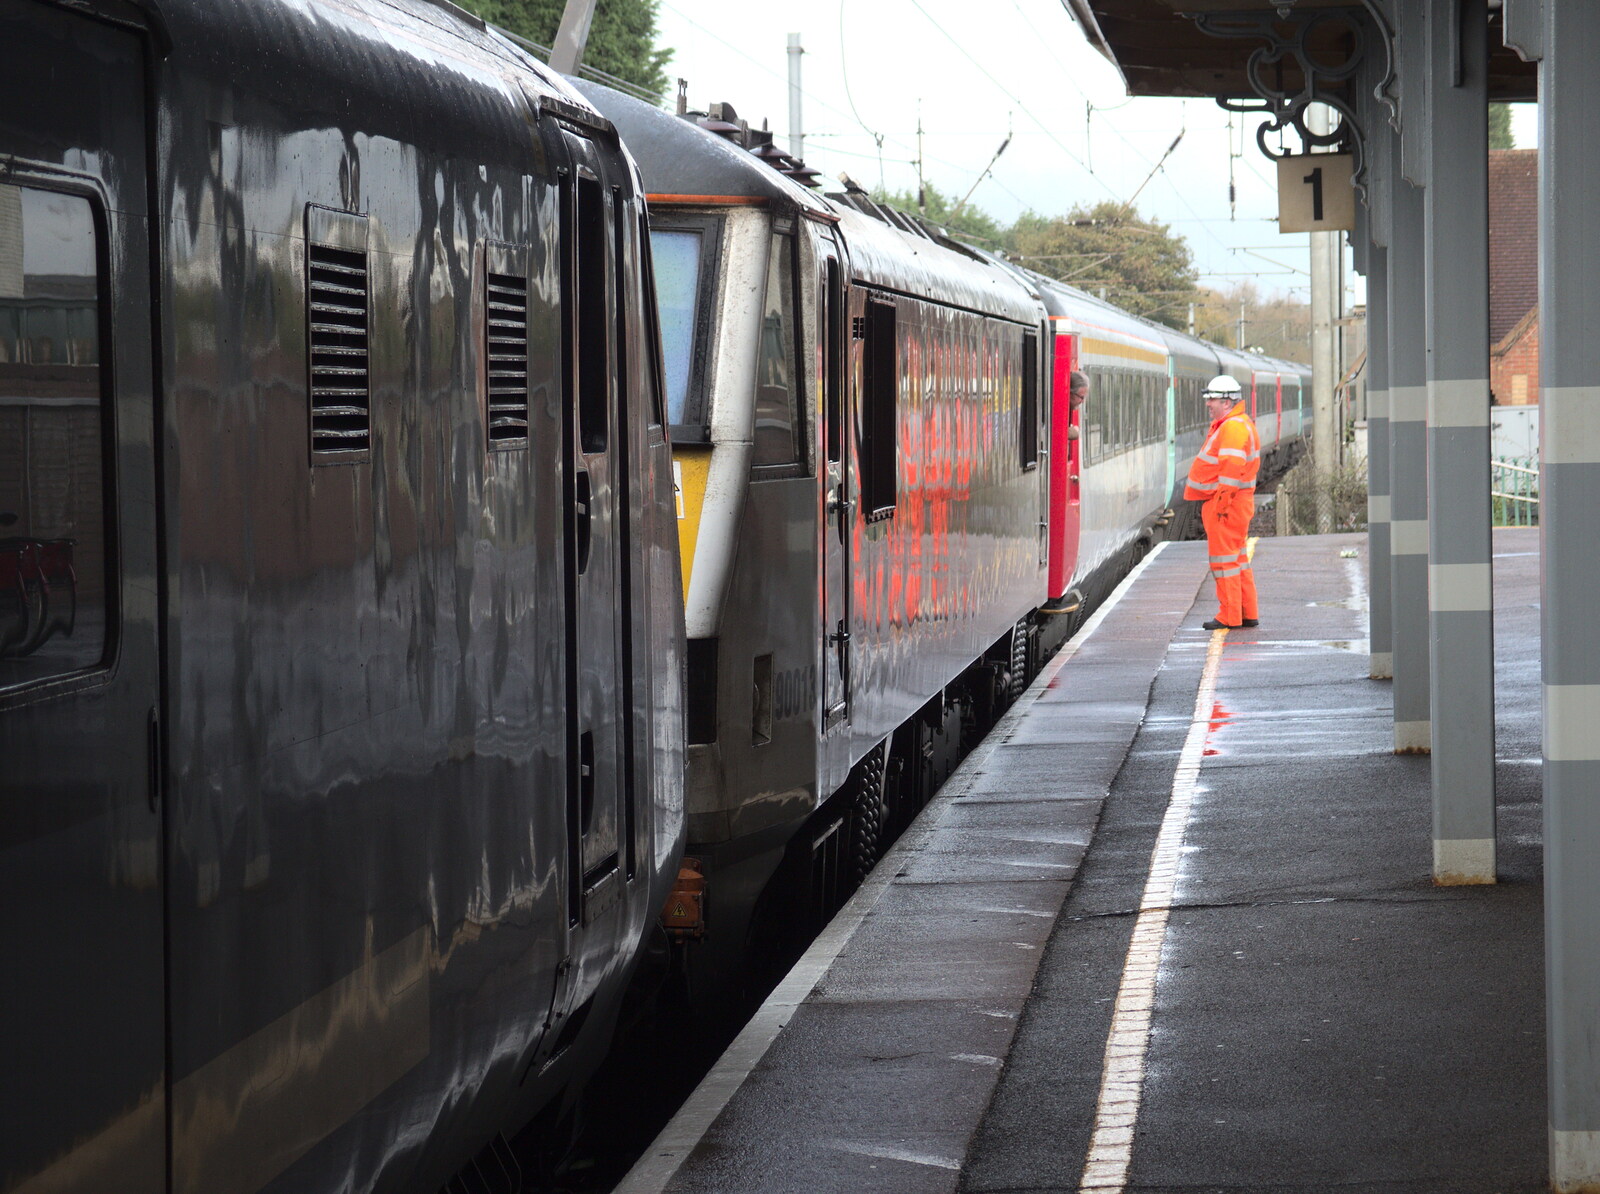 The monster train parked at Stowmarket from (Very) Long Train (Not) Running, Stowmarket, Suffolk - 21st October 2014